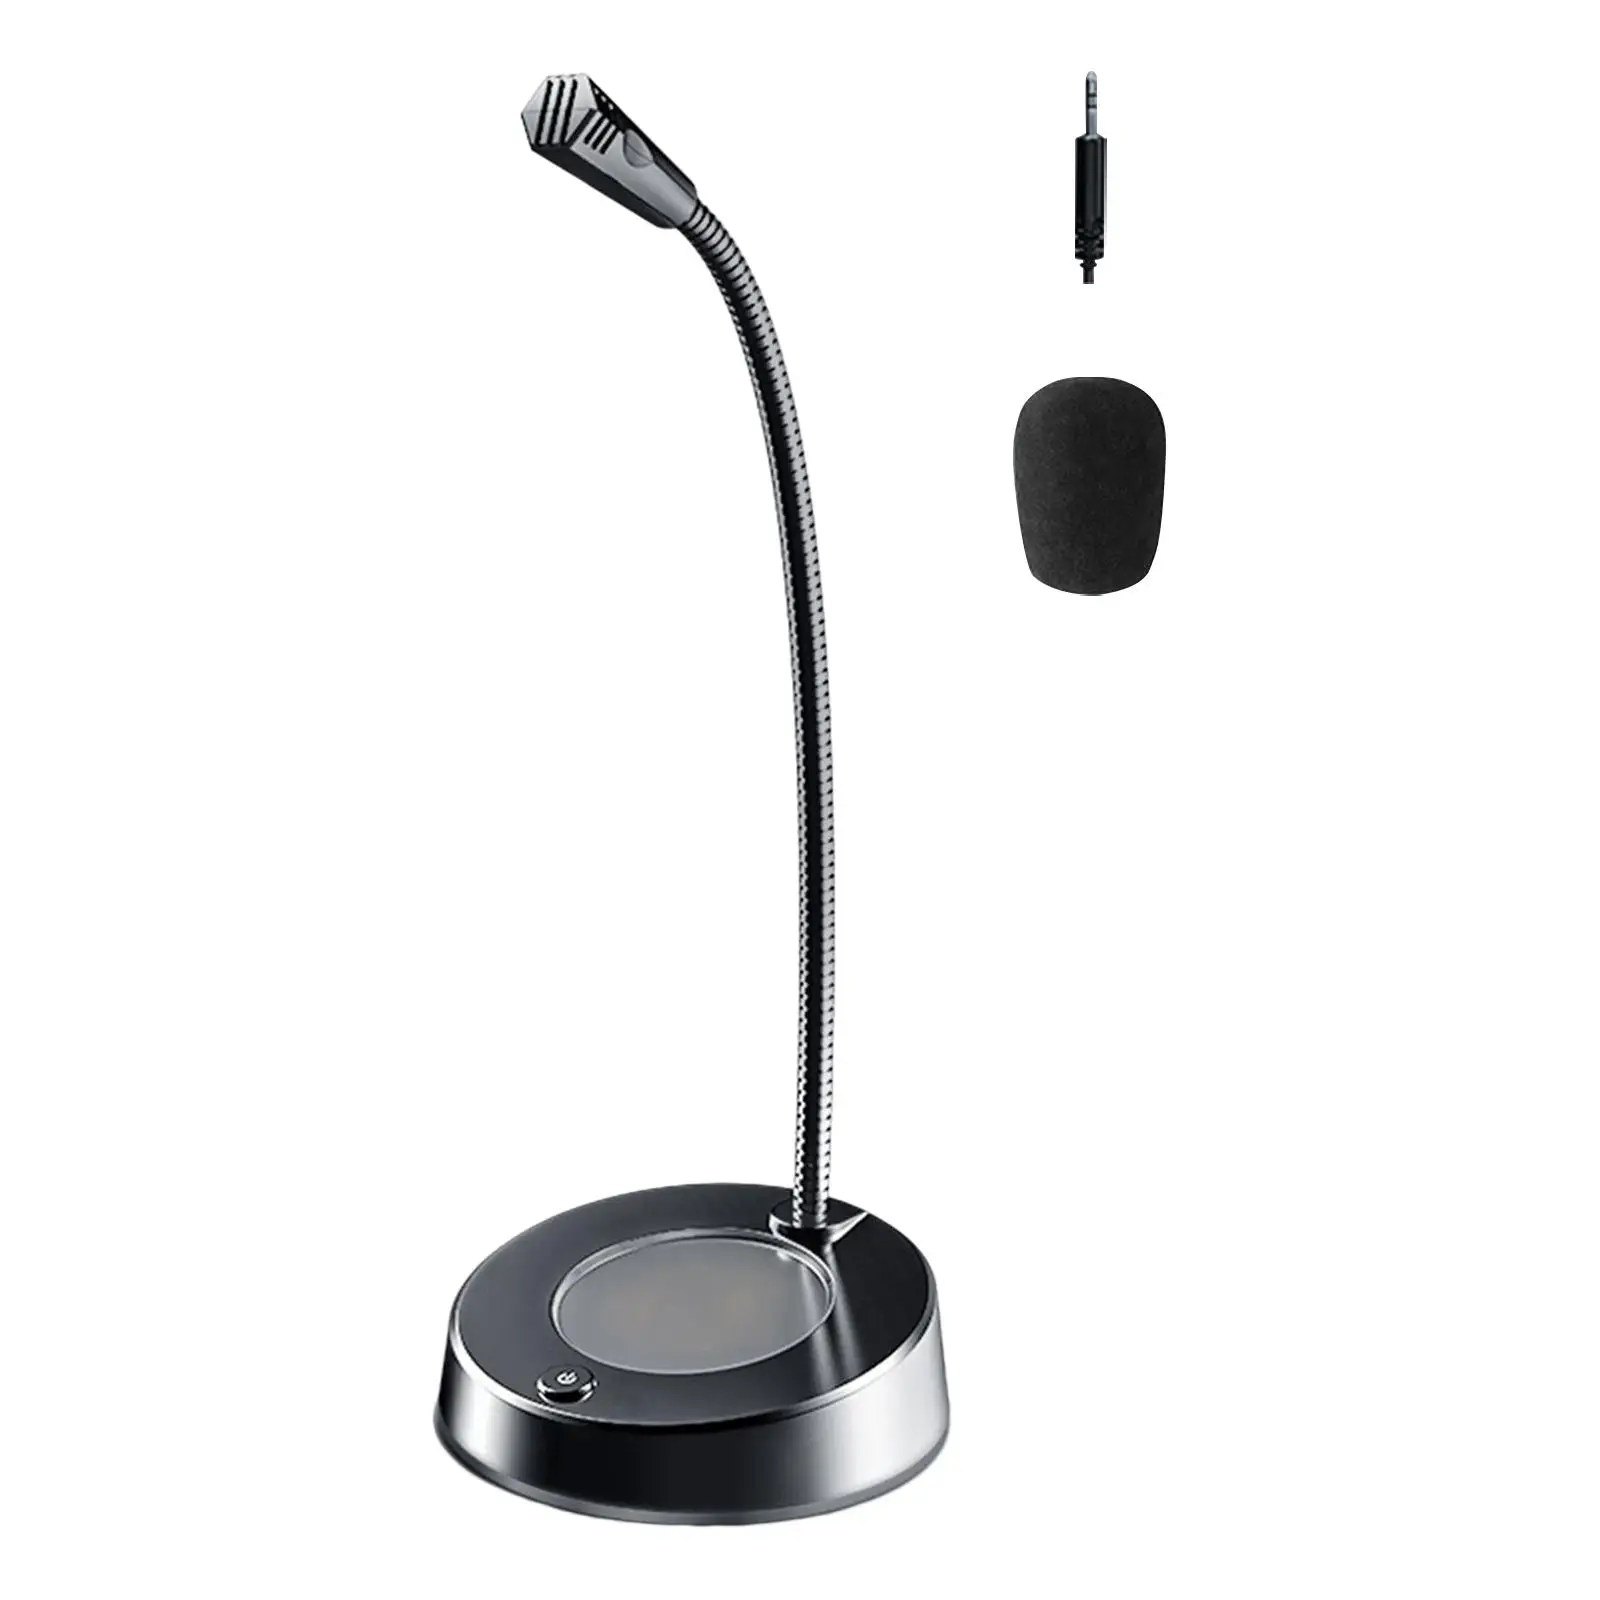 Microphone Voice Speakers Noise Cancelling for Dictation Office Business Gaming